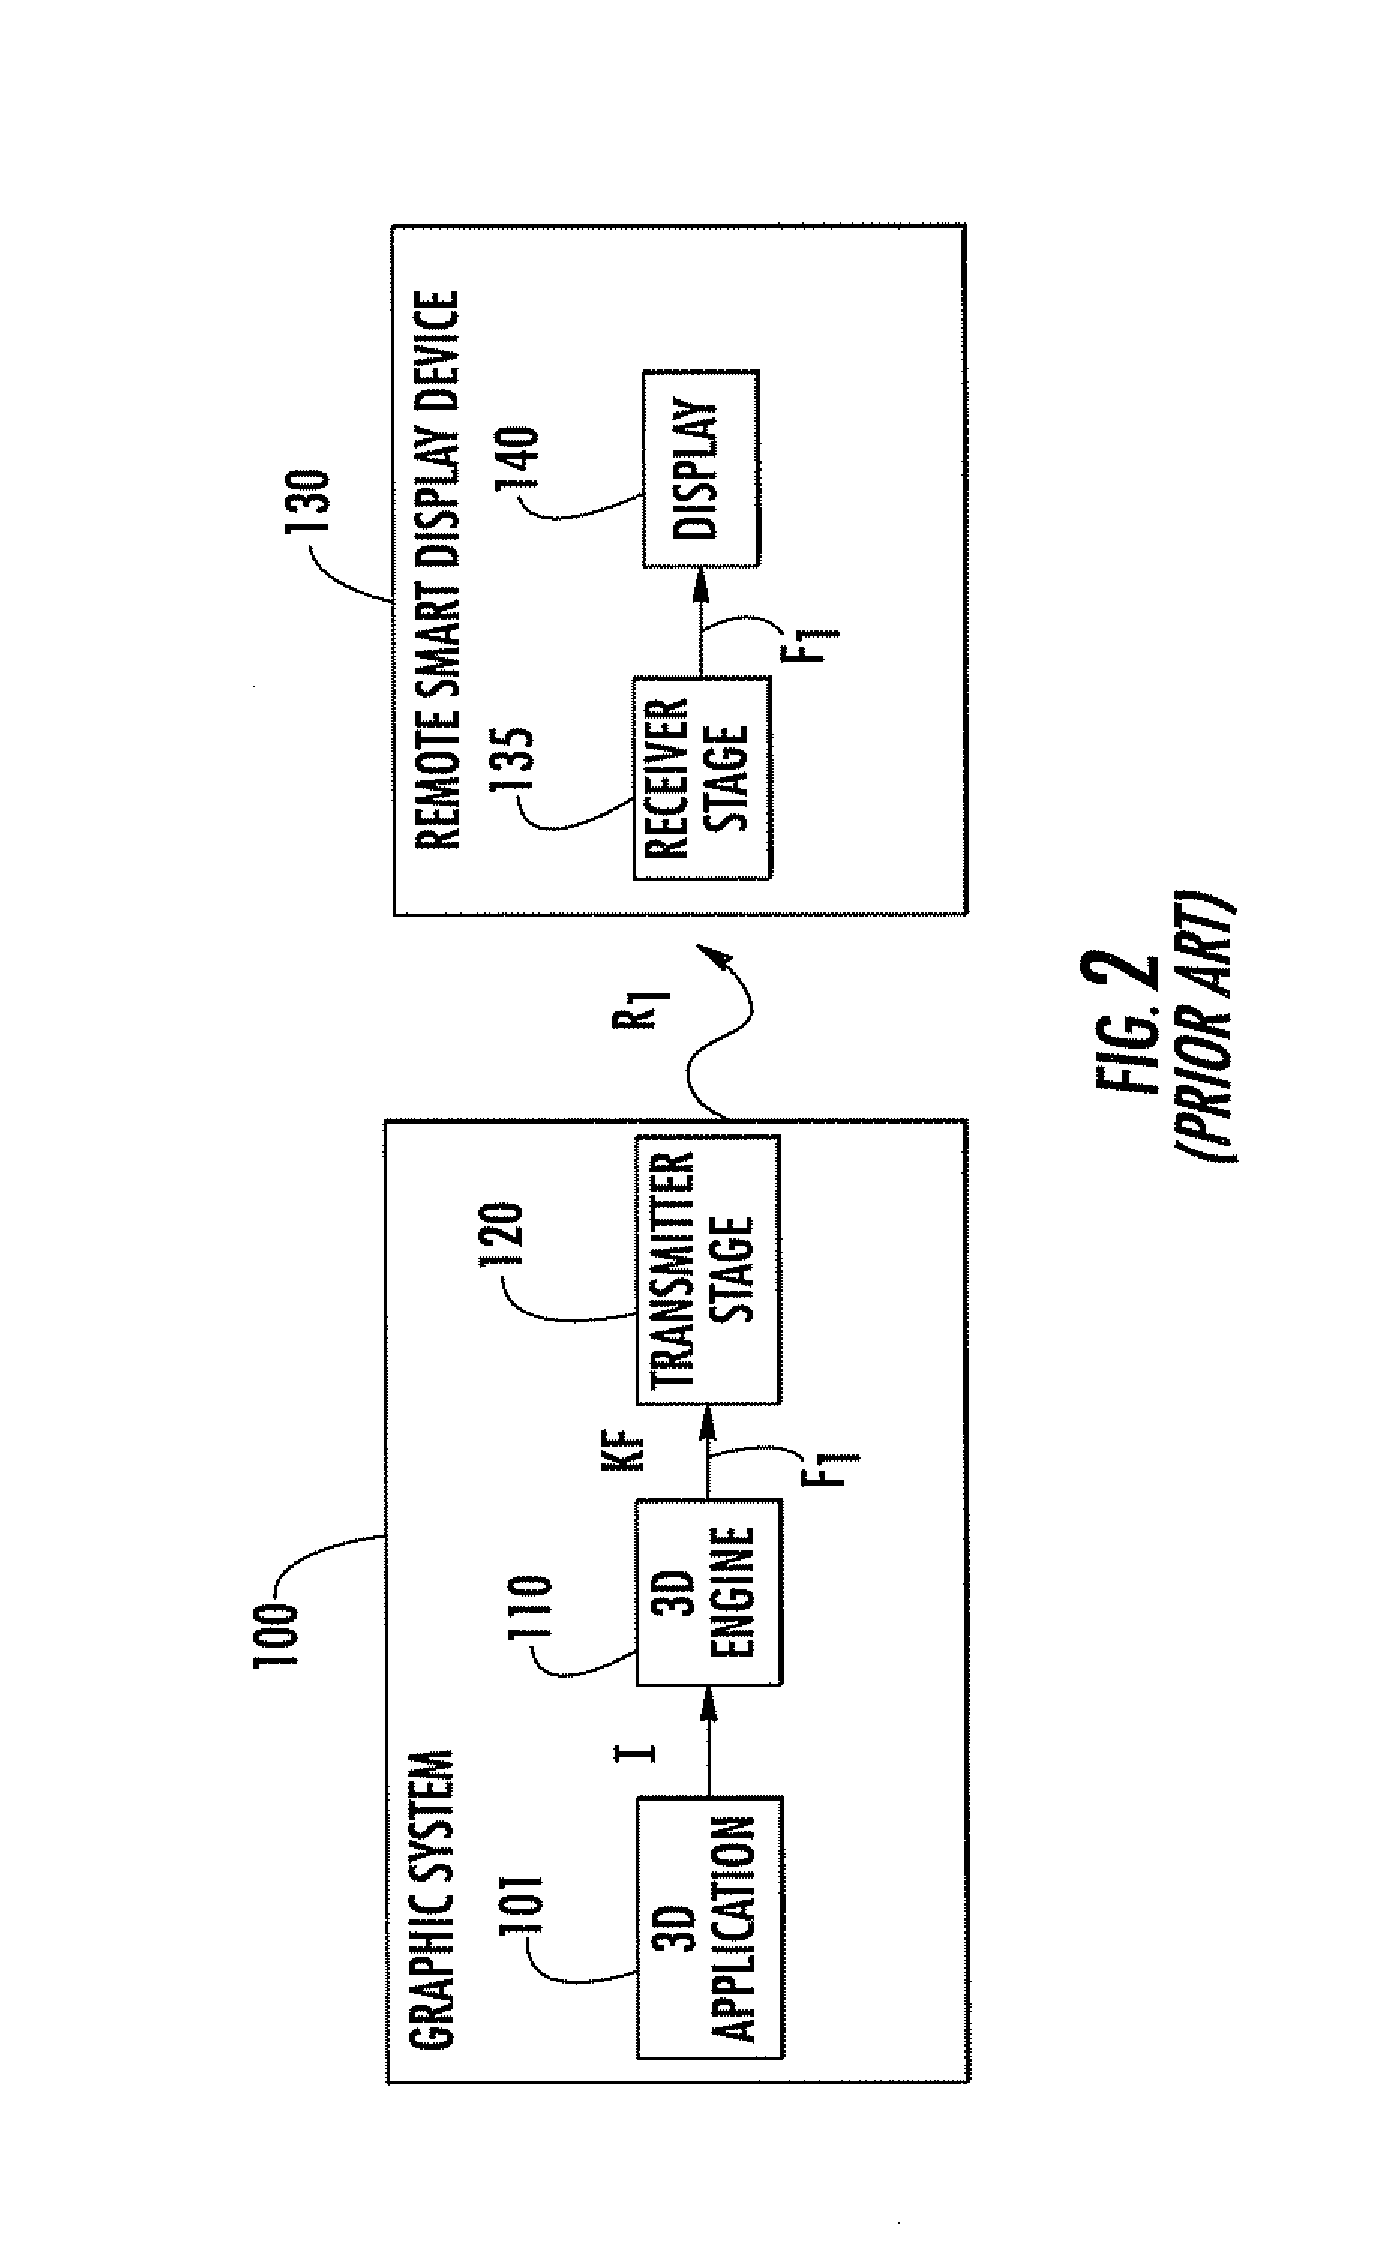 Graphic system comprising a pipelined graphic engine, pipelining method and computer program product